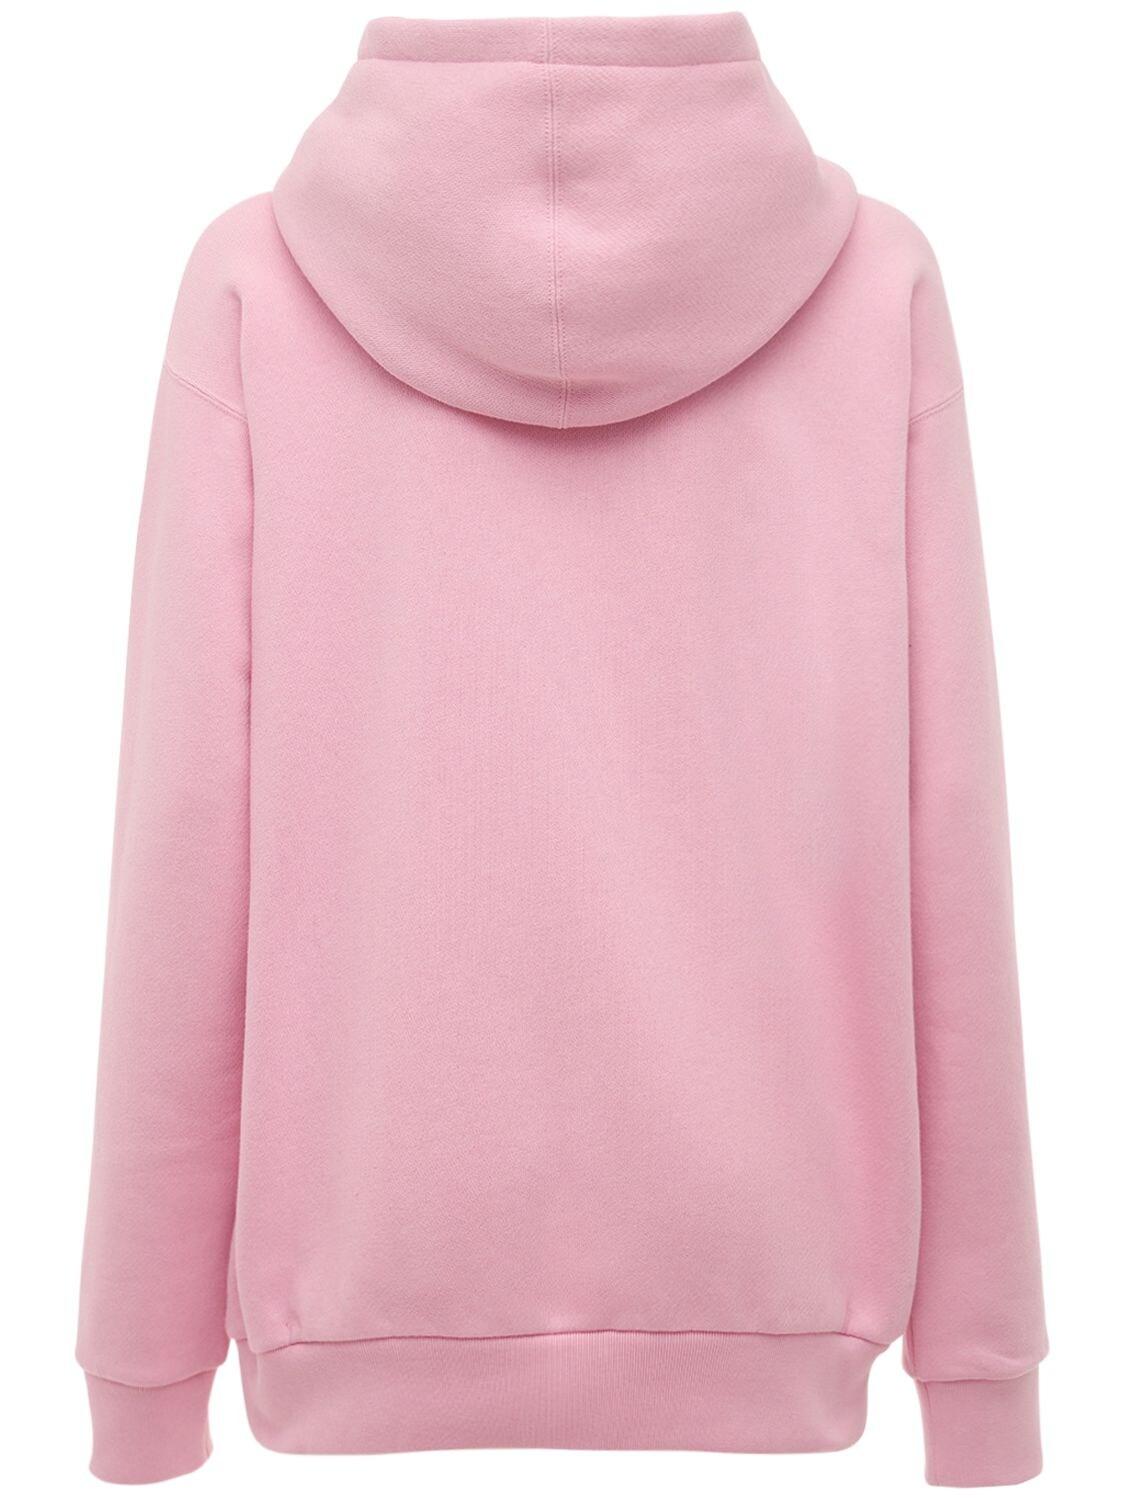 Gucci Oversize Disney X Cotton Hoodie in Pink - Lyst